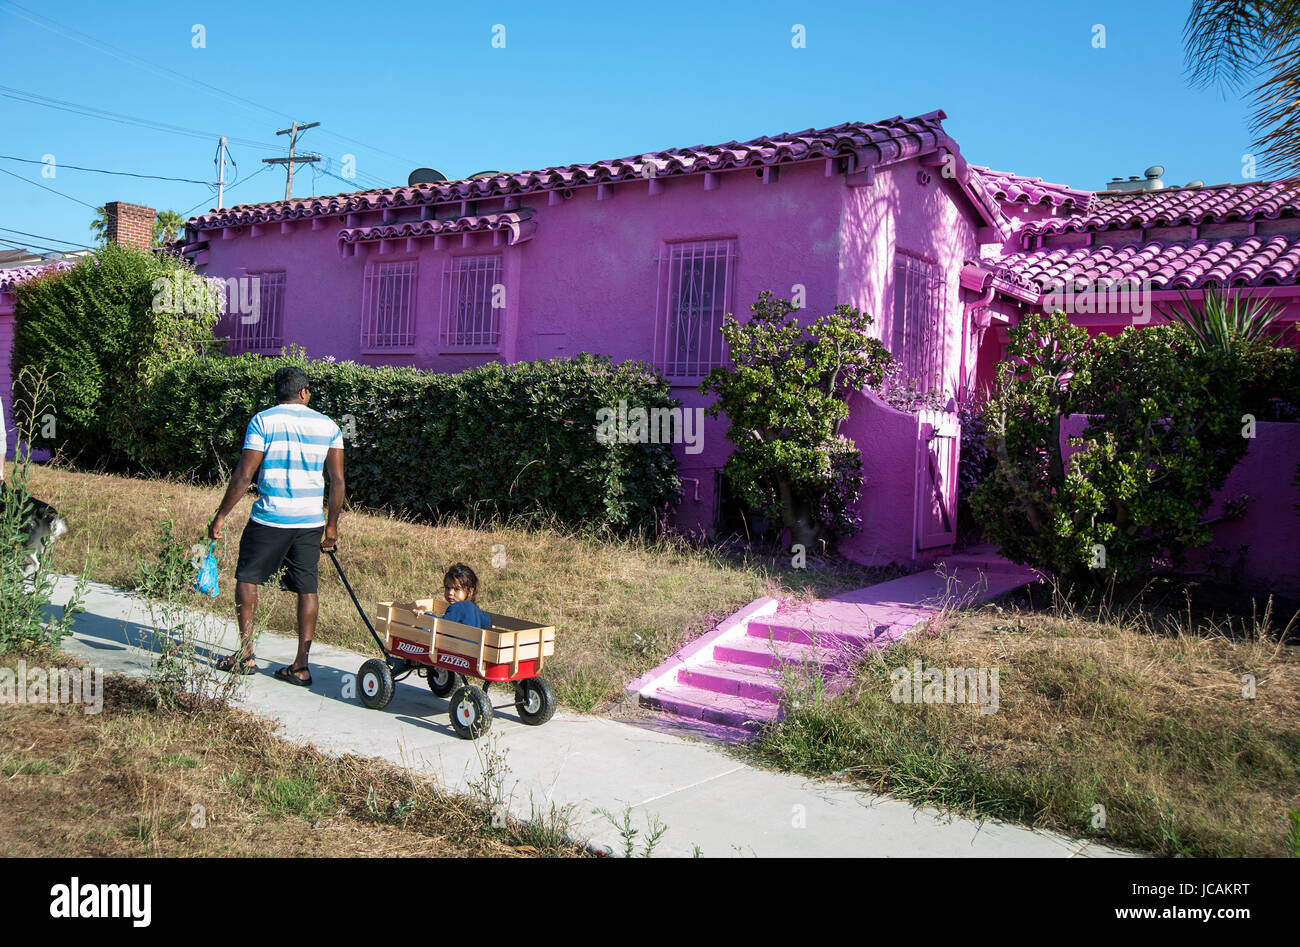 Neighborhood houses painted bright pink as part of an art project in Los Angeles, CA. curated by Impermanent Art. Stock Photo